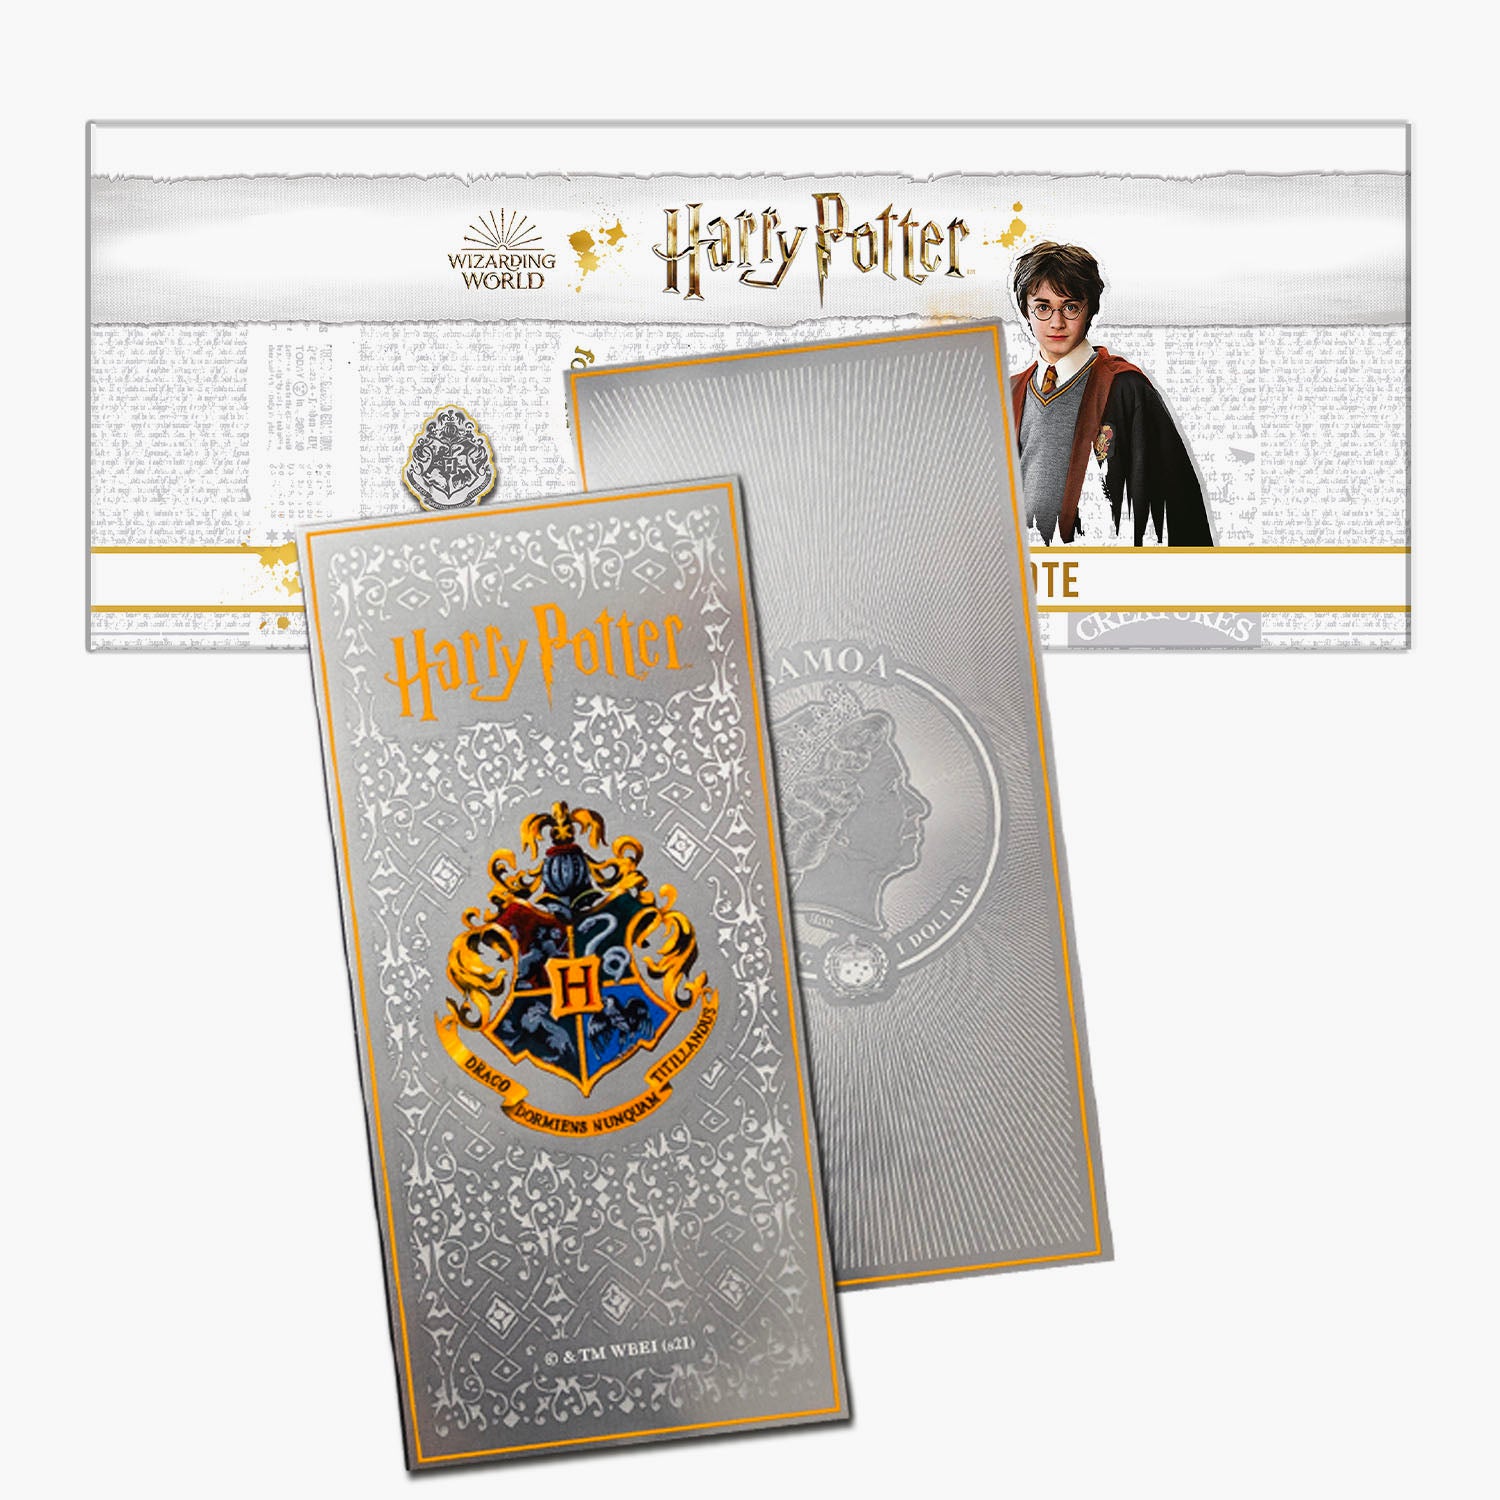 Harry Potter, Portugal Stamps, Worldwide Stamps, Coins Banknotes and  Accessories for Collectors